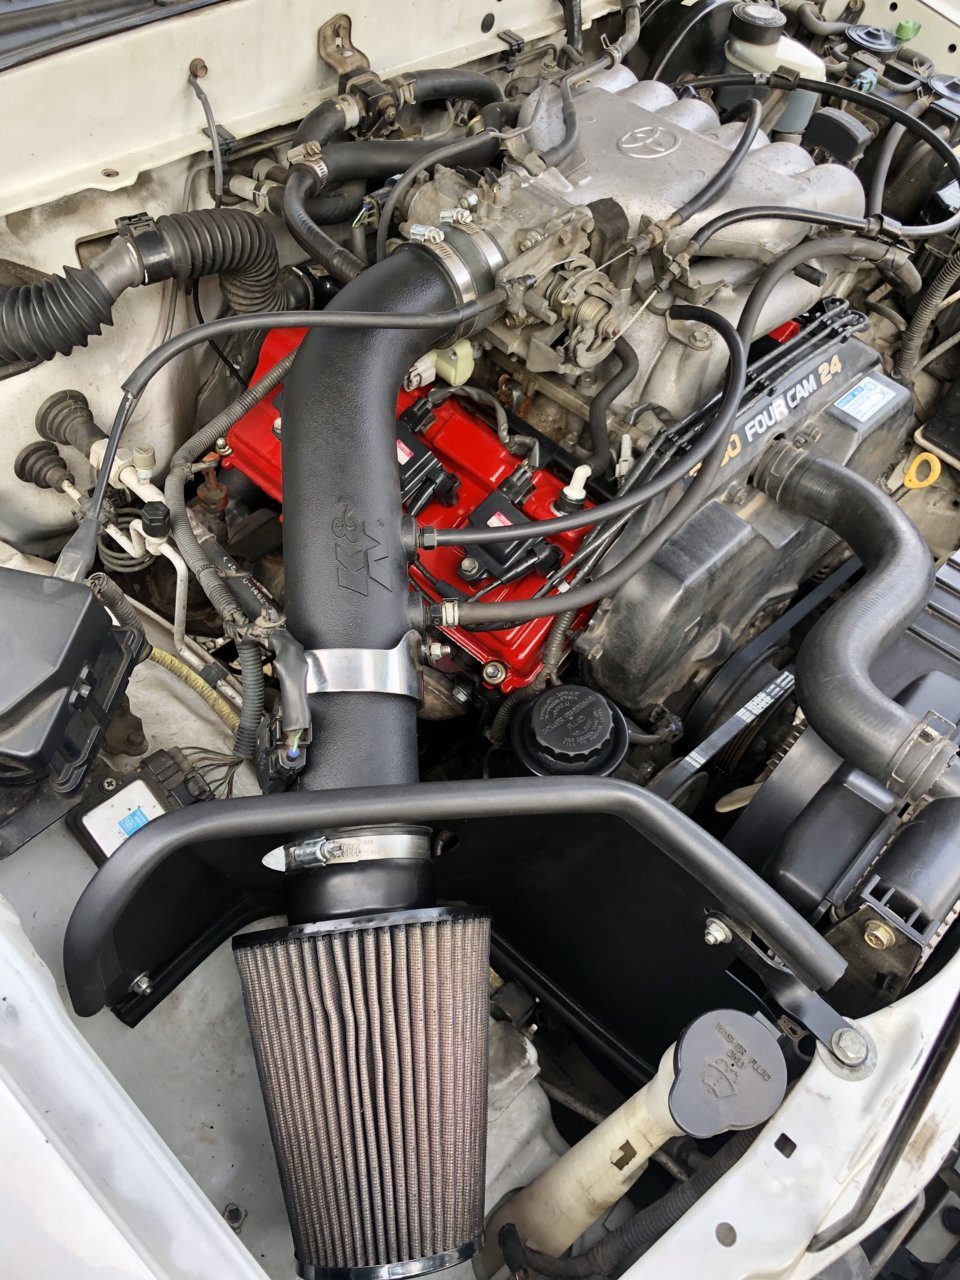 Curious what 3.4 cold air intakes you guys are running | Tacoma World